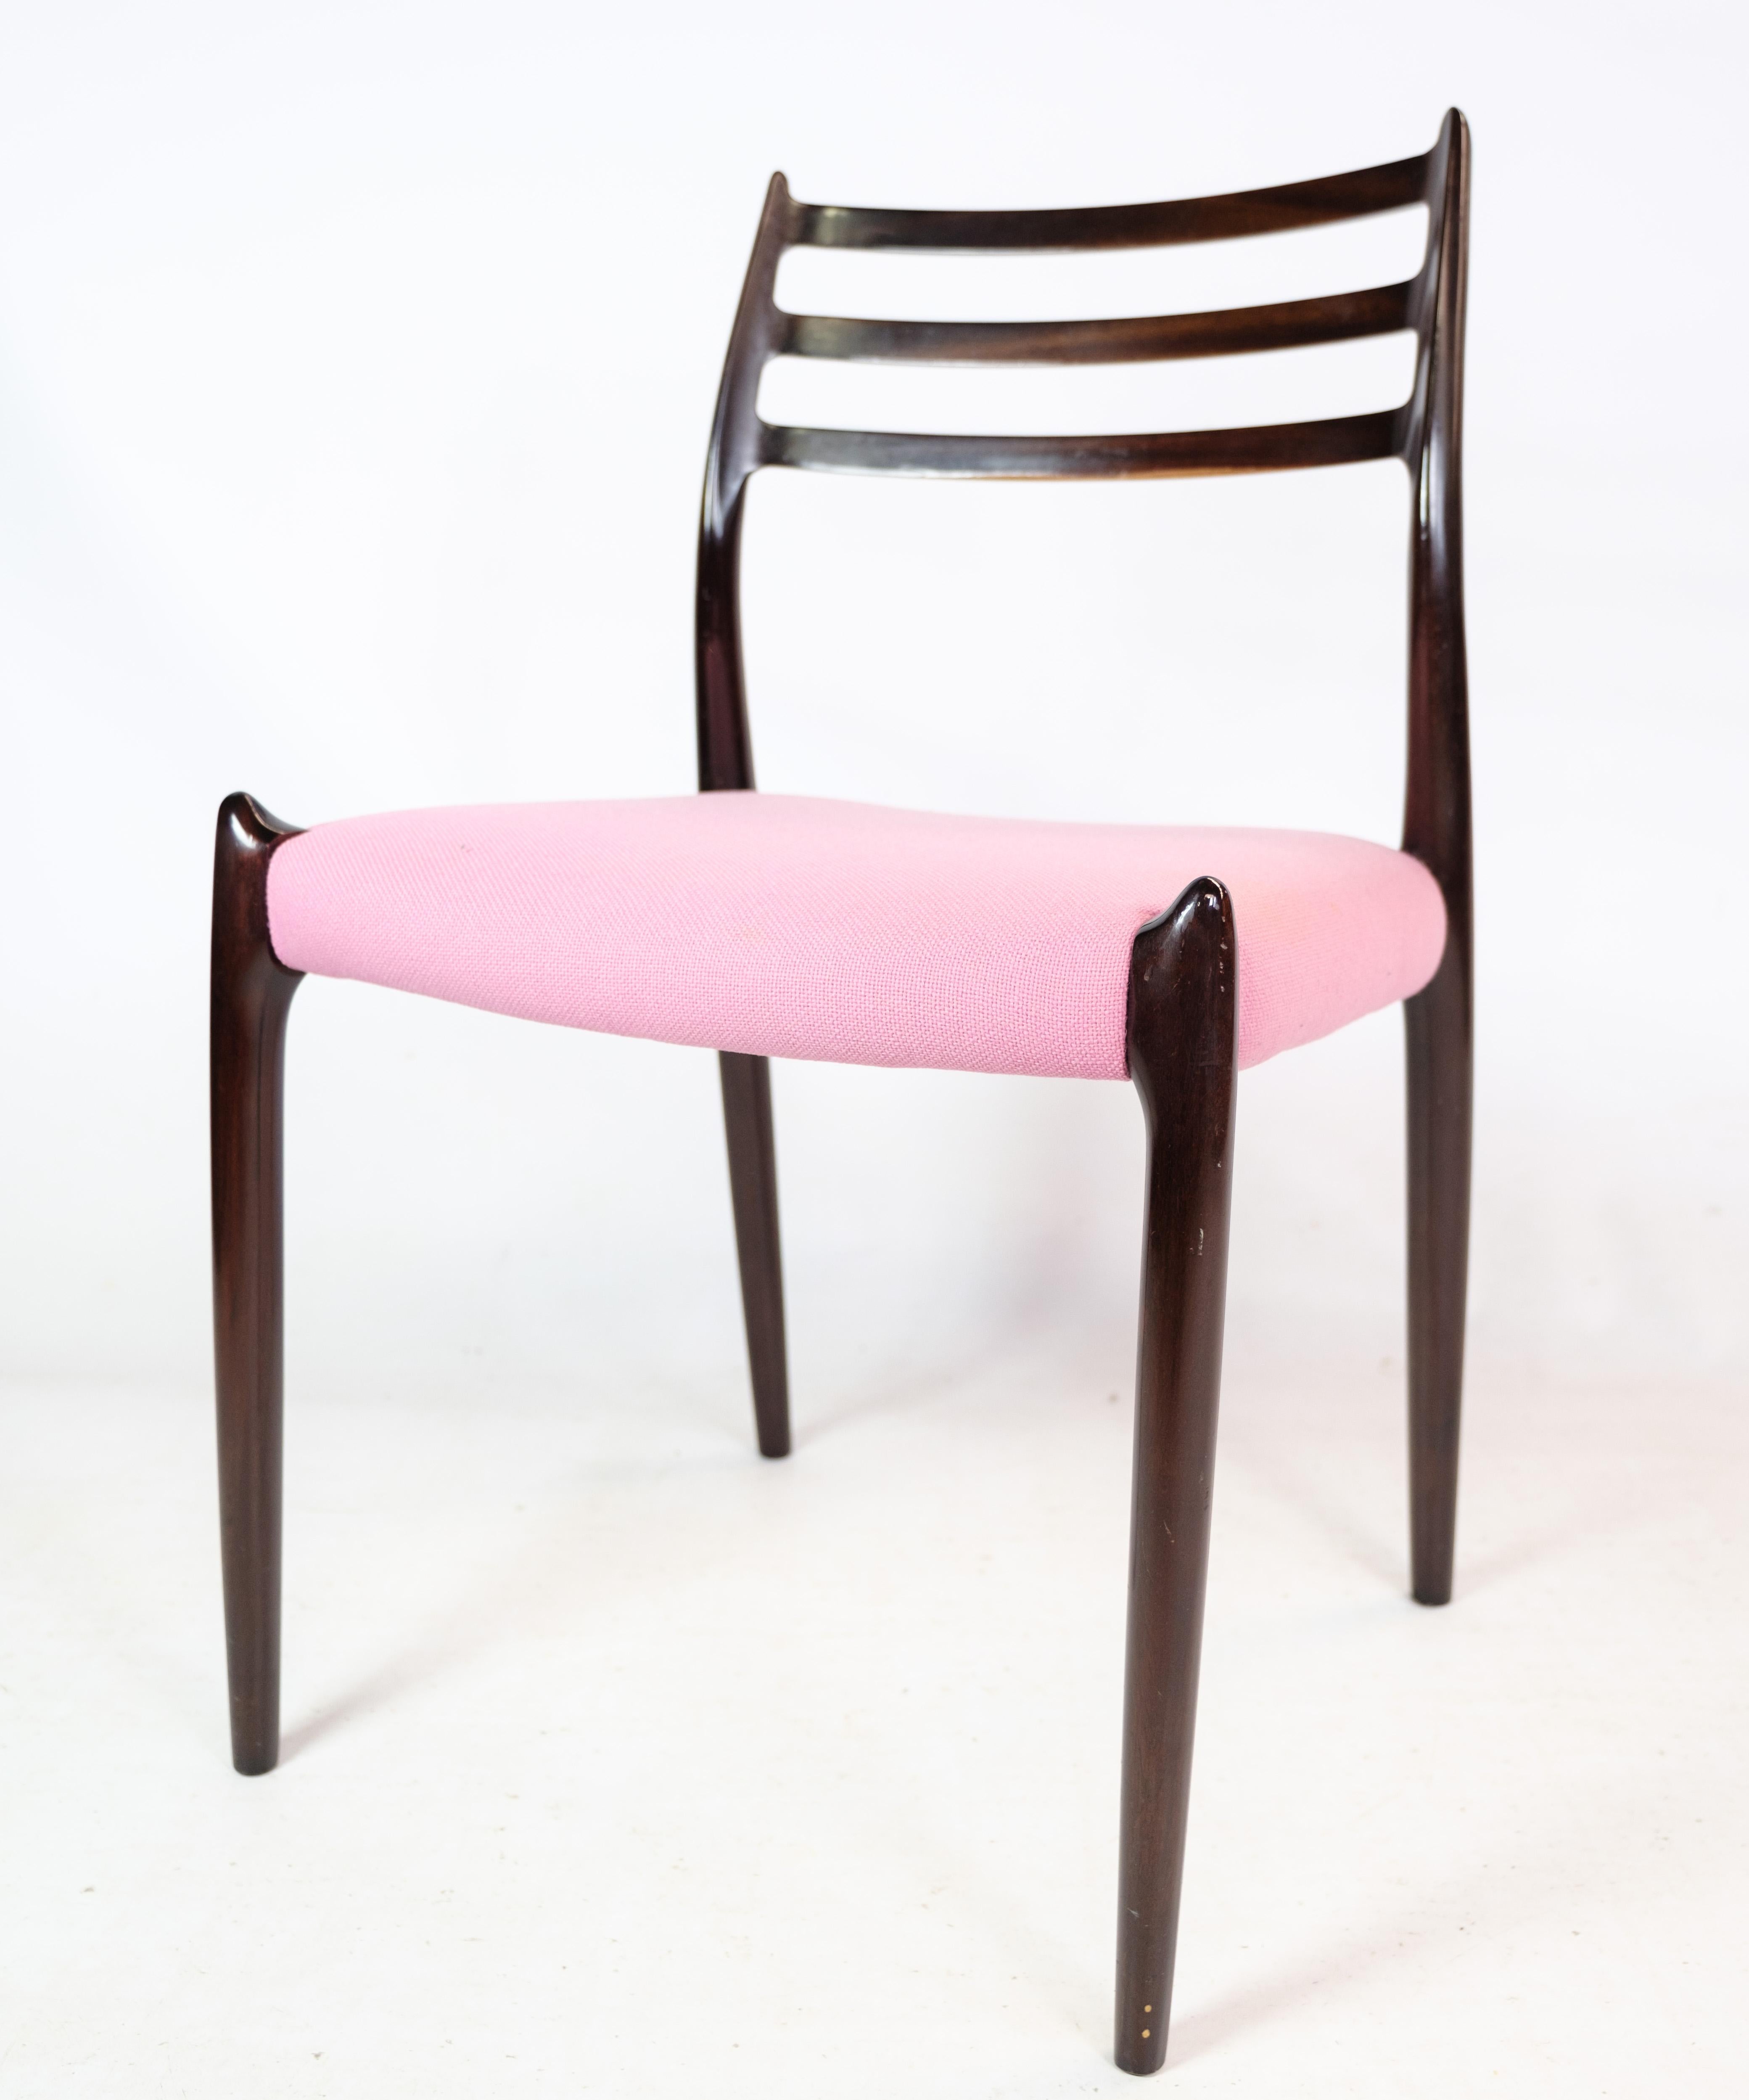 Mahogany dining table chairs, model 78, designed by N.O Møller and manufactured by JL Møller. Upholstered with pink fabric, which is in very fine used condition. We have professional workshop so if reupholstery is desired we are able to professional